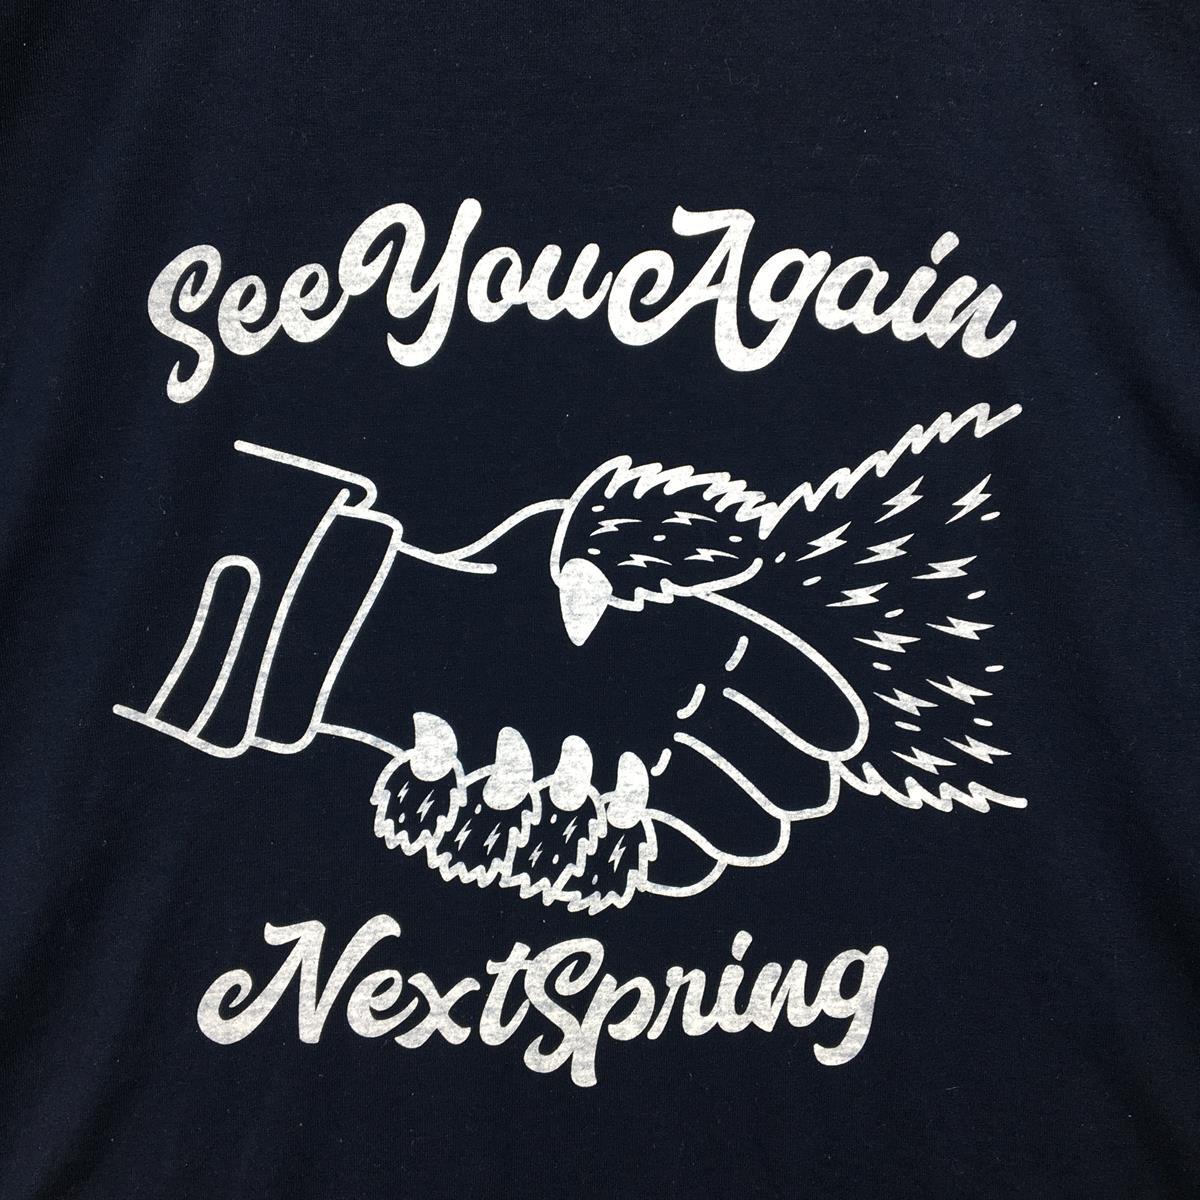 MENs L リッジマウンテンギア 2021 See You Again Next Spring Tシャツ Hand Shake 熊保護活動 生産終の画像6